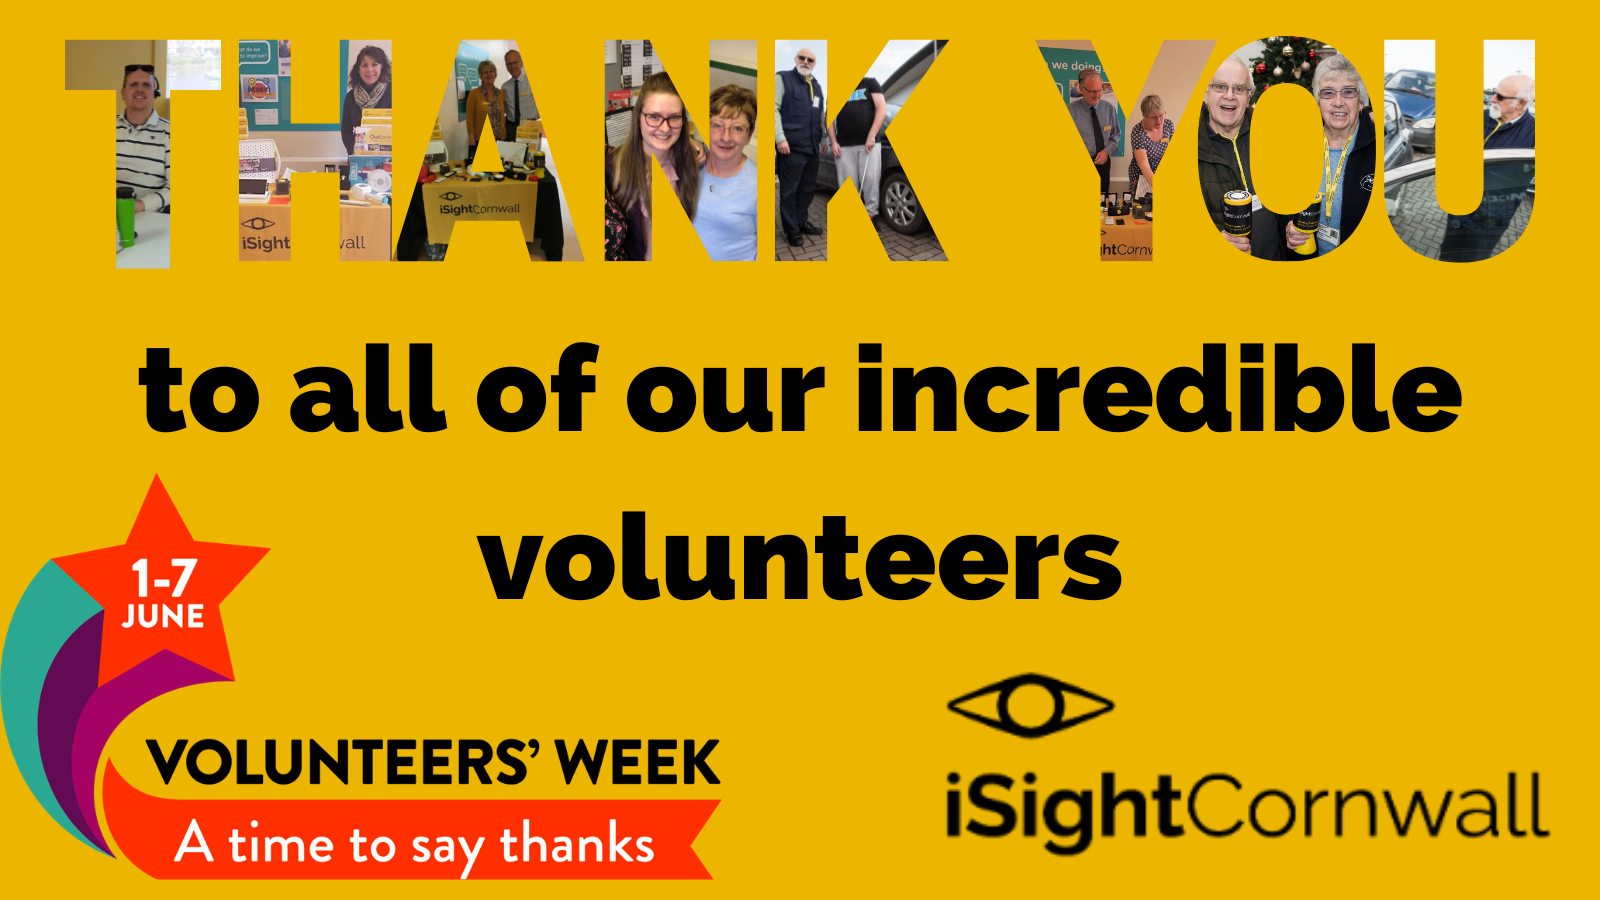 Thank you to all of our incredible volunters